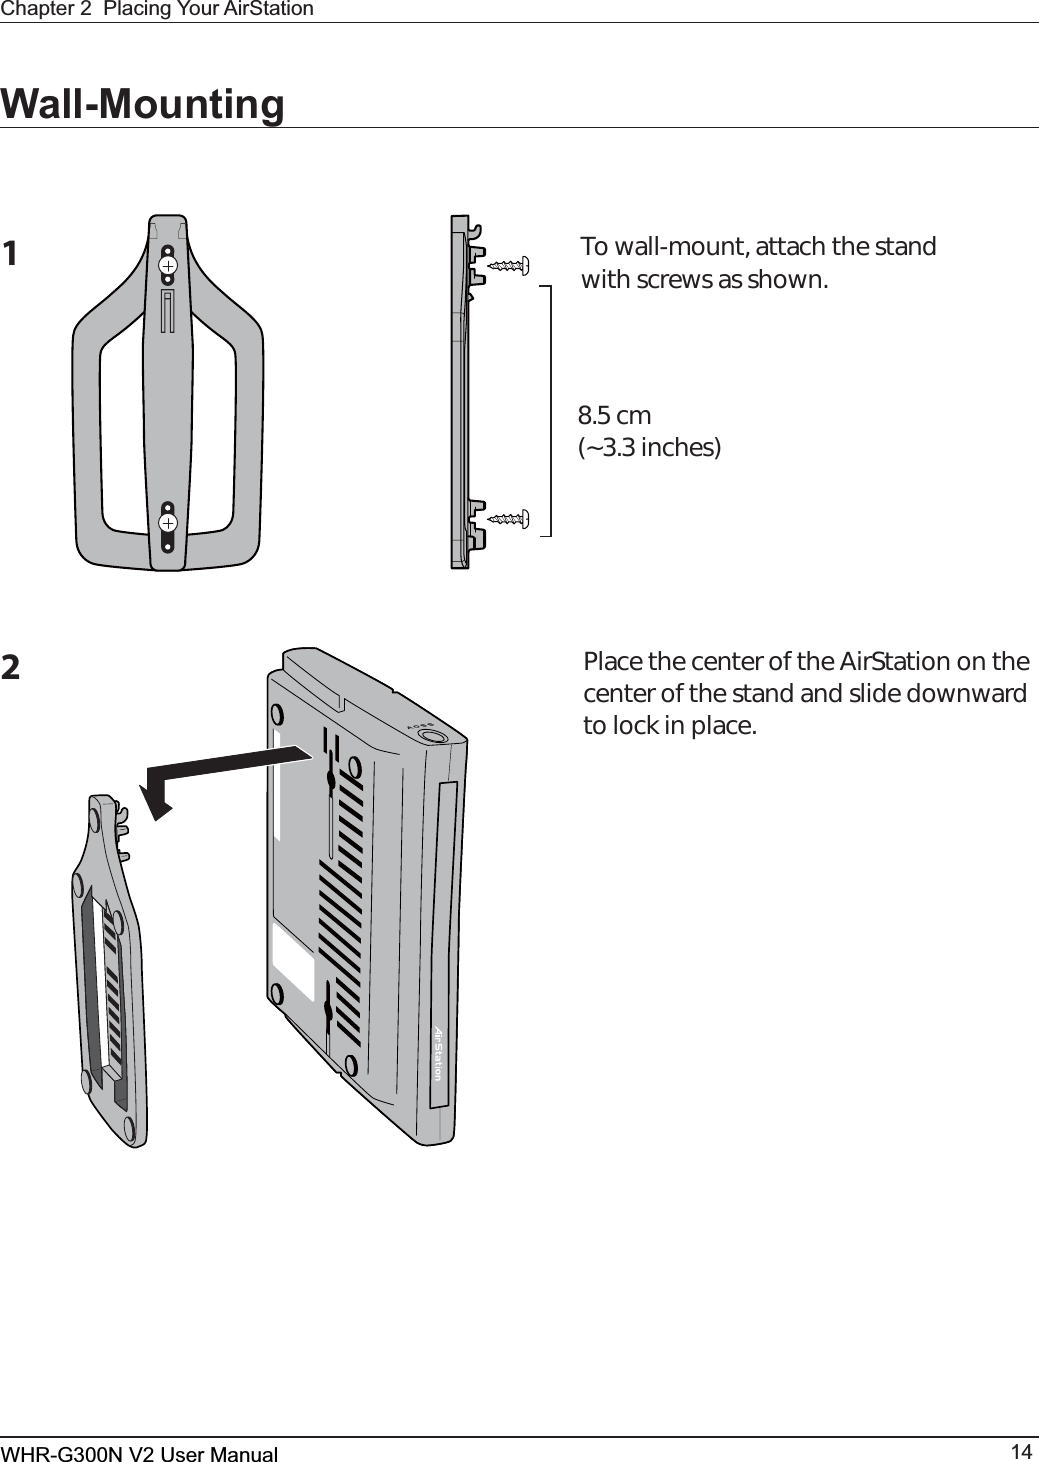 WHR-G300N User Manual 14Chapter 2  Placing Your AirStationWall-Mounting1To wall-mount, attach the stand with screws as shown.8.5 cm(3.3 inches)2Place the center of the AirStation on the center of the stand and slide downward to lock in place.WHR-G300N V2 User Manual